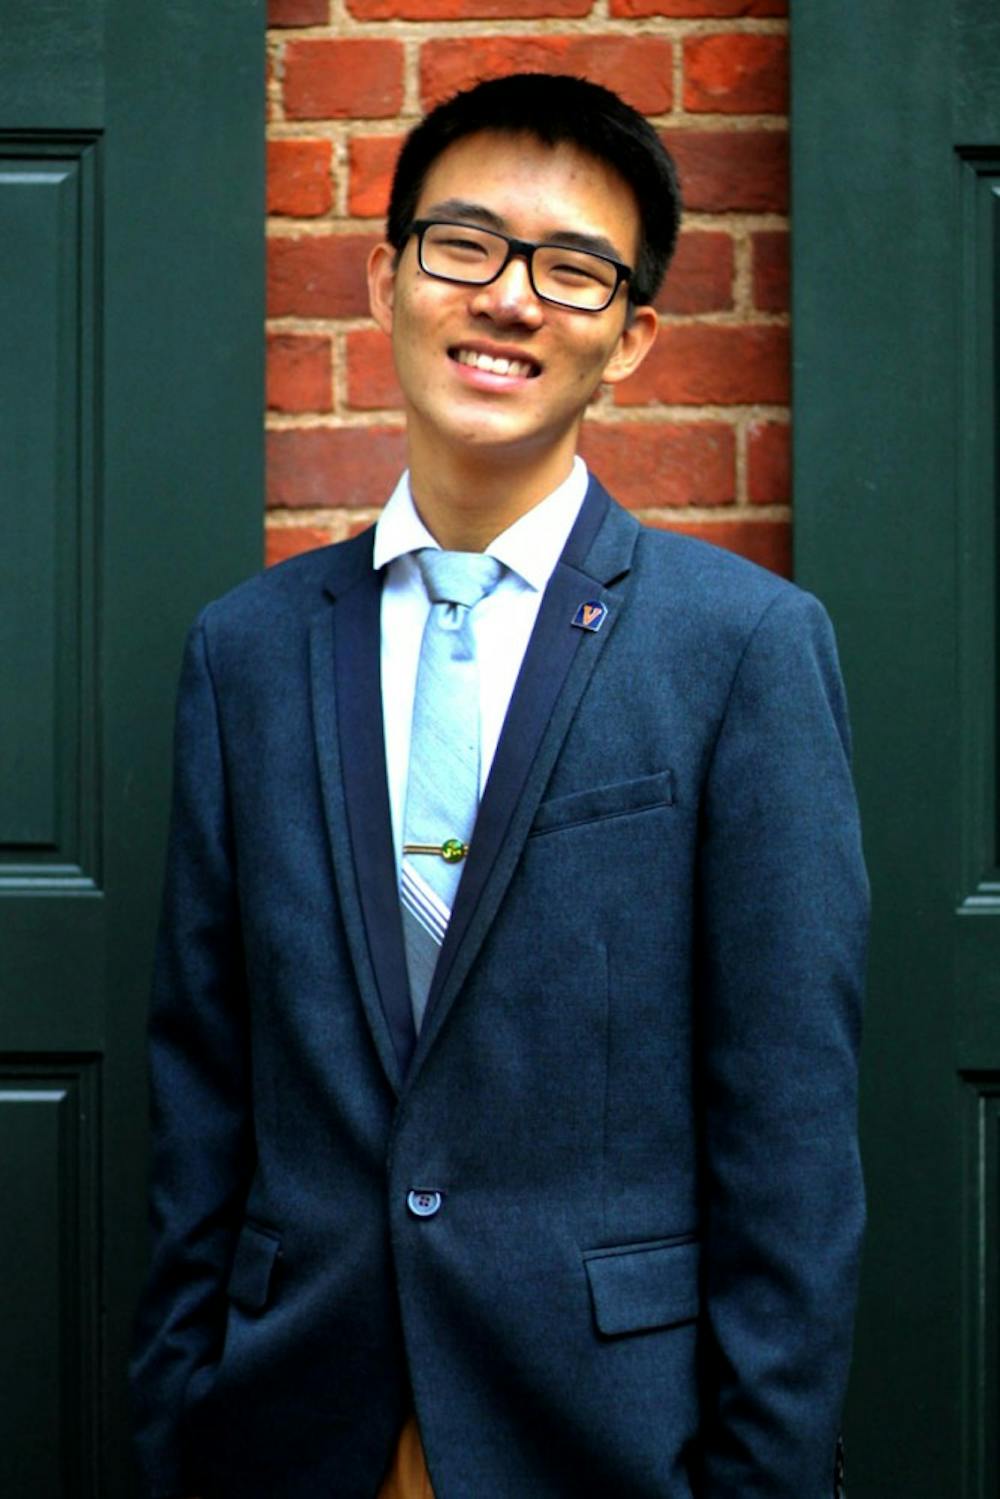 <p>Wang has served as vice chair of community relations for the Honor Committee and was recently elected to serve as an Honor undergraduate Arts and Sciences representative for the upcoming year.</p>